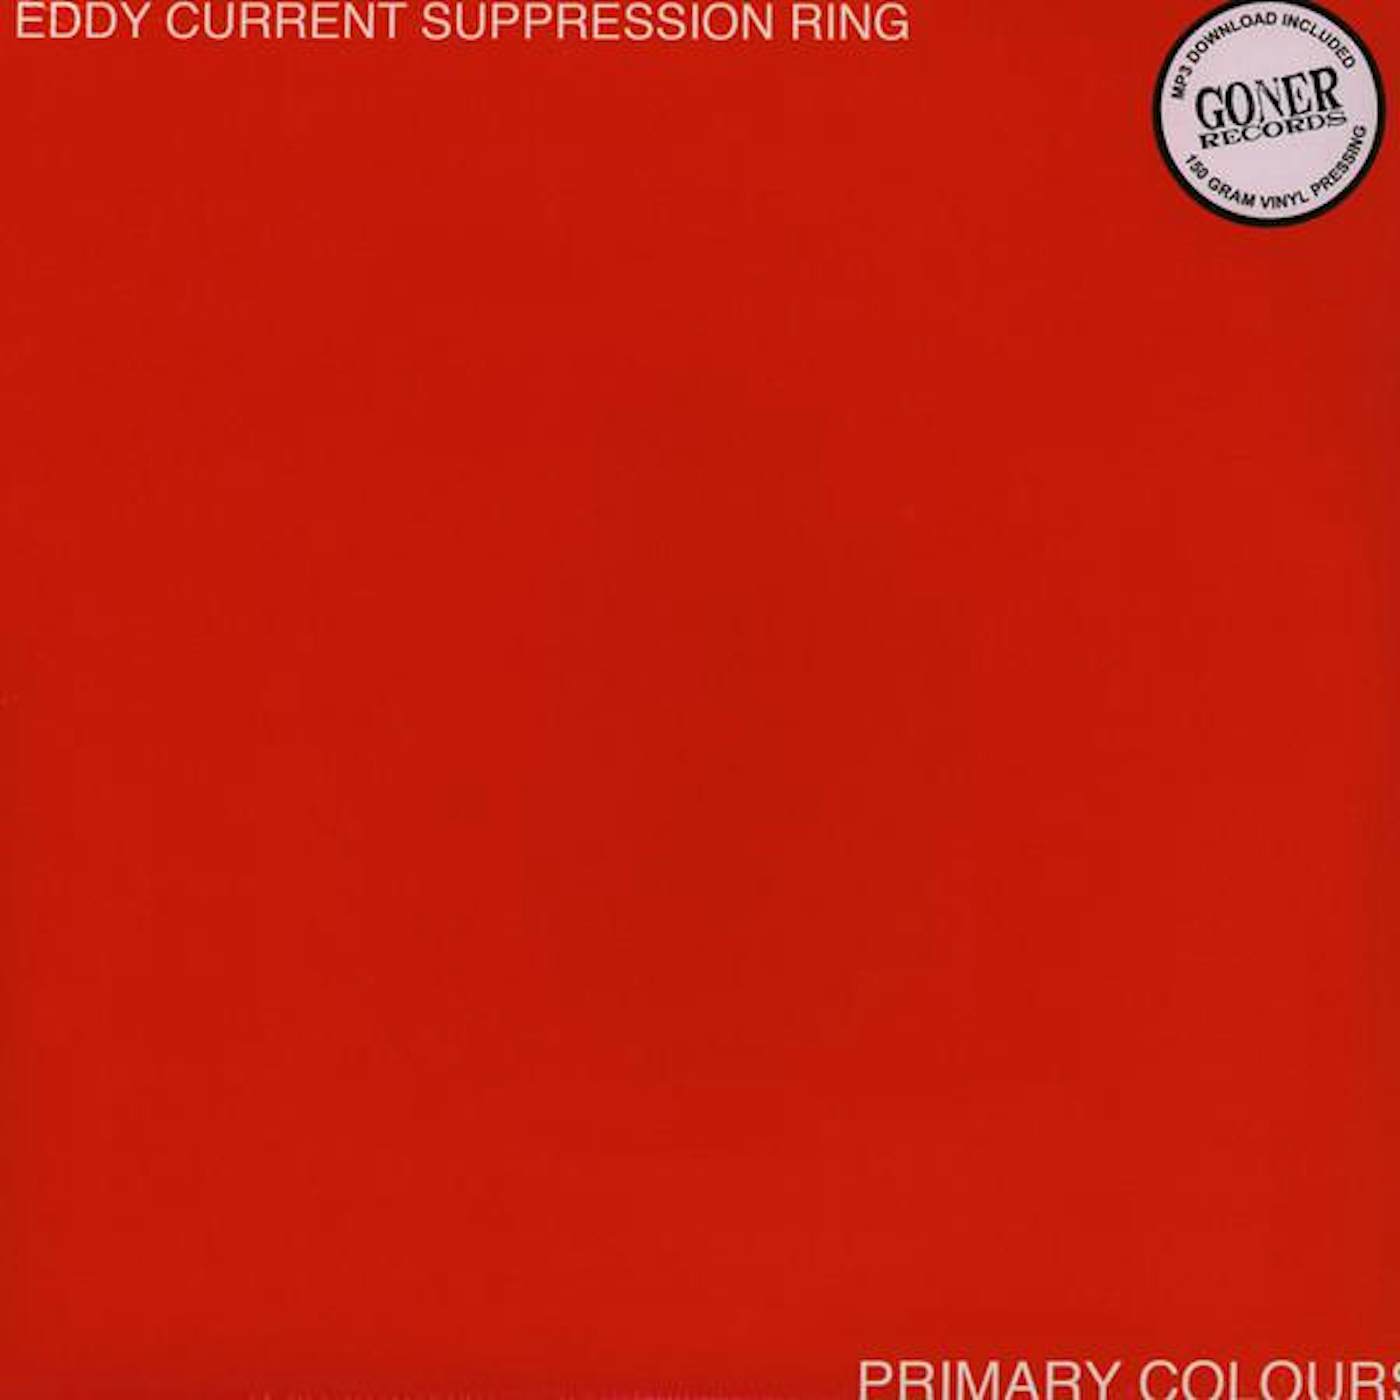 Eddy Current Suppression Ring Primary Colours Vinyl Record